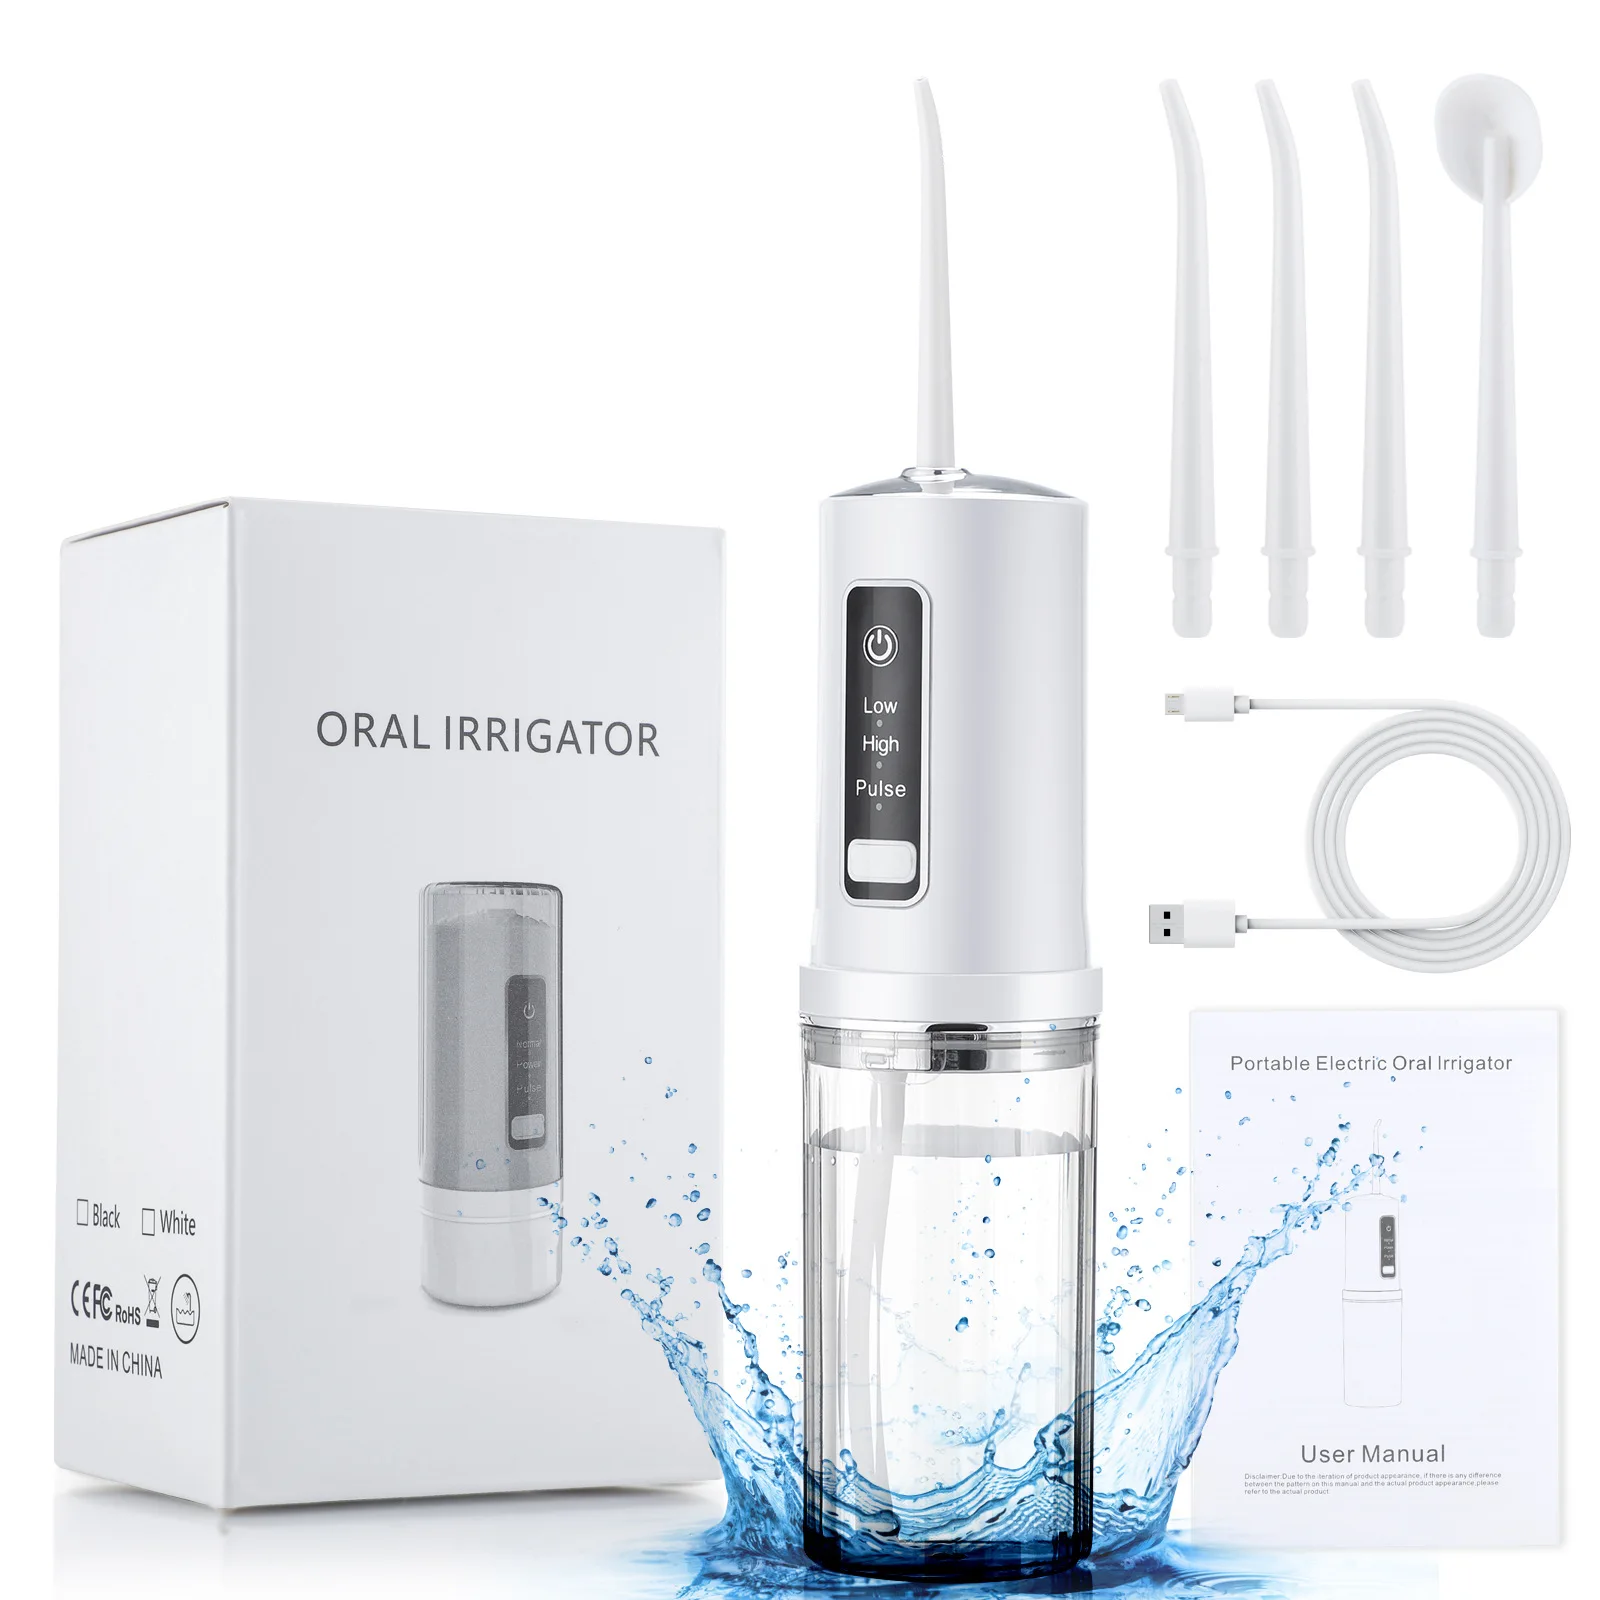 

Oral Irrigator Portable Water Dental Flosser USB Rechargeable Water Jet Floss Tooth Pick 4 Jet Tip 230ml 3 Modes Waterproof IPX7